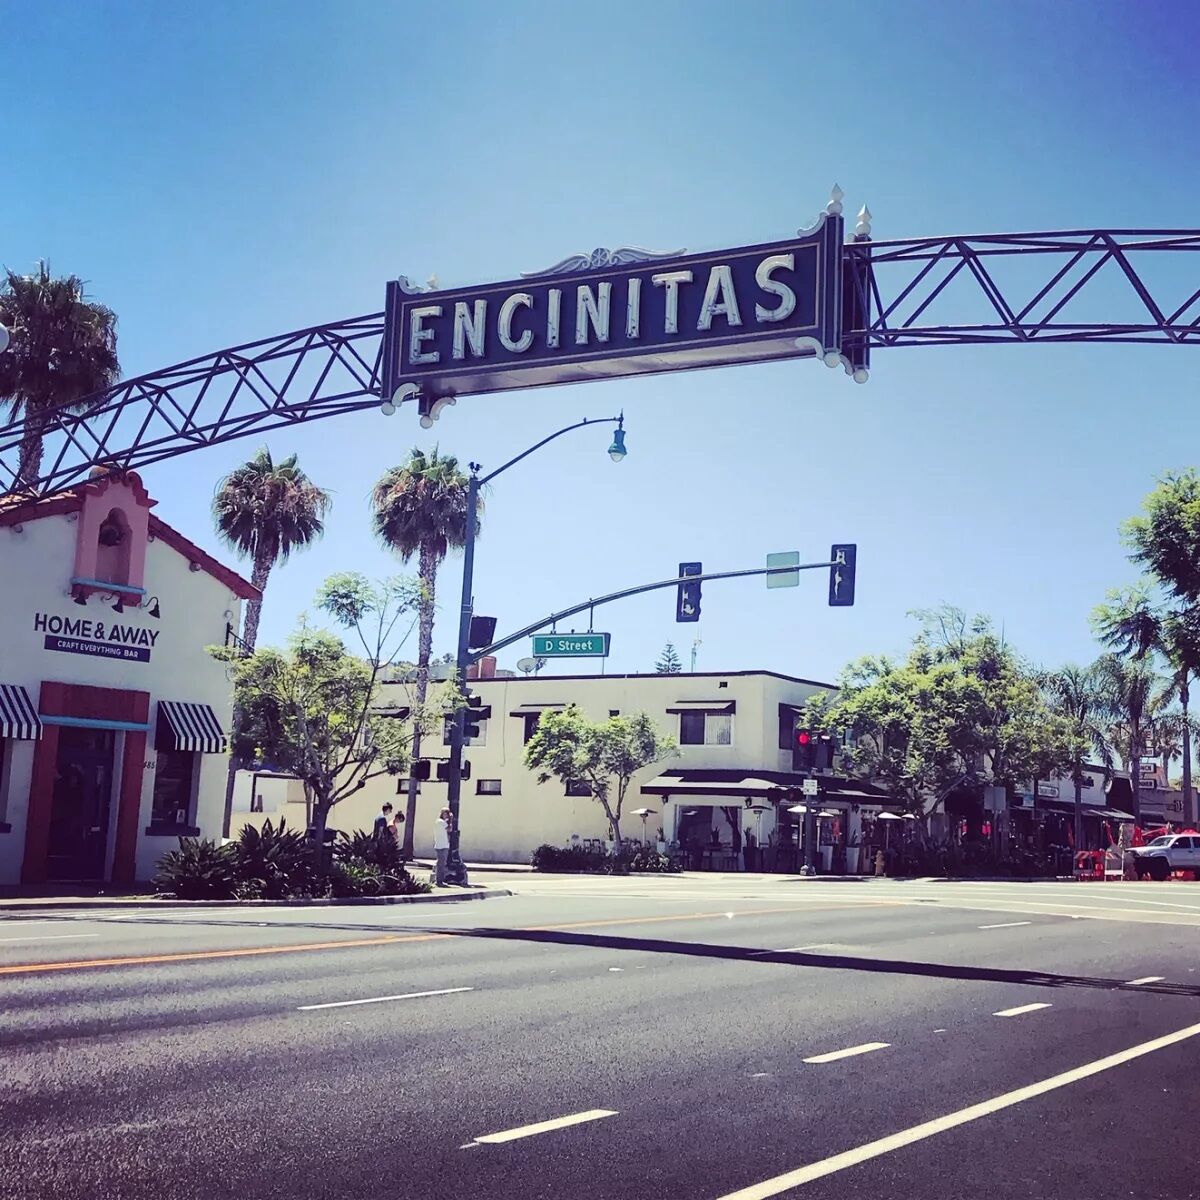 The “Mr. Encinitas” mural will be unveiled Dec. 6.